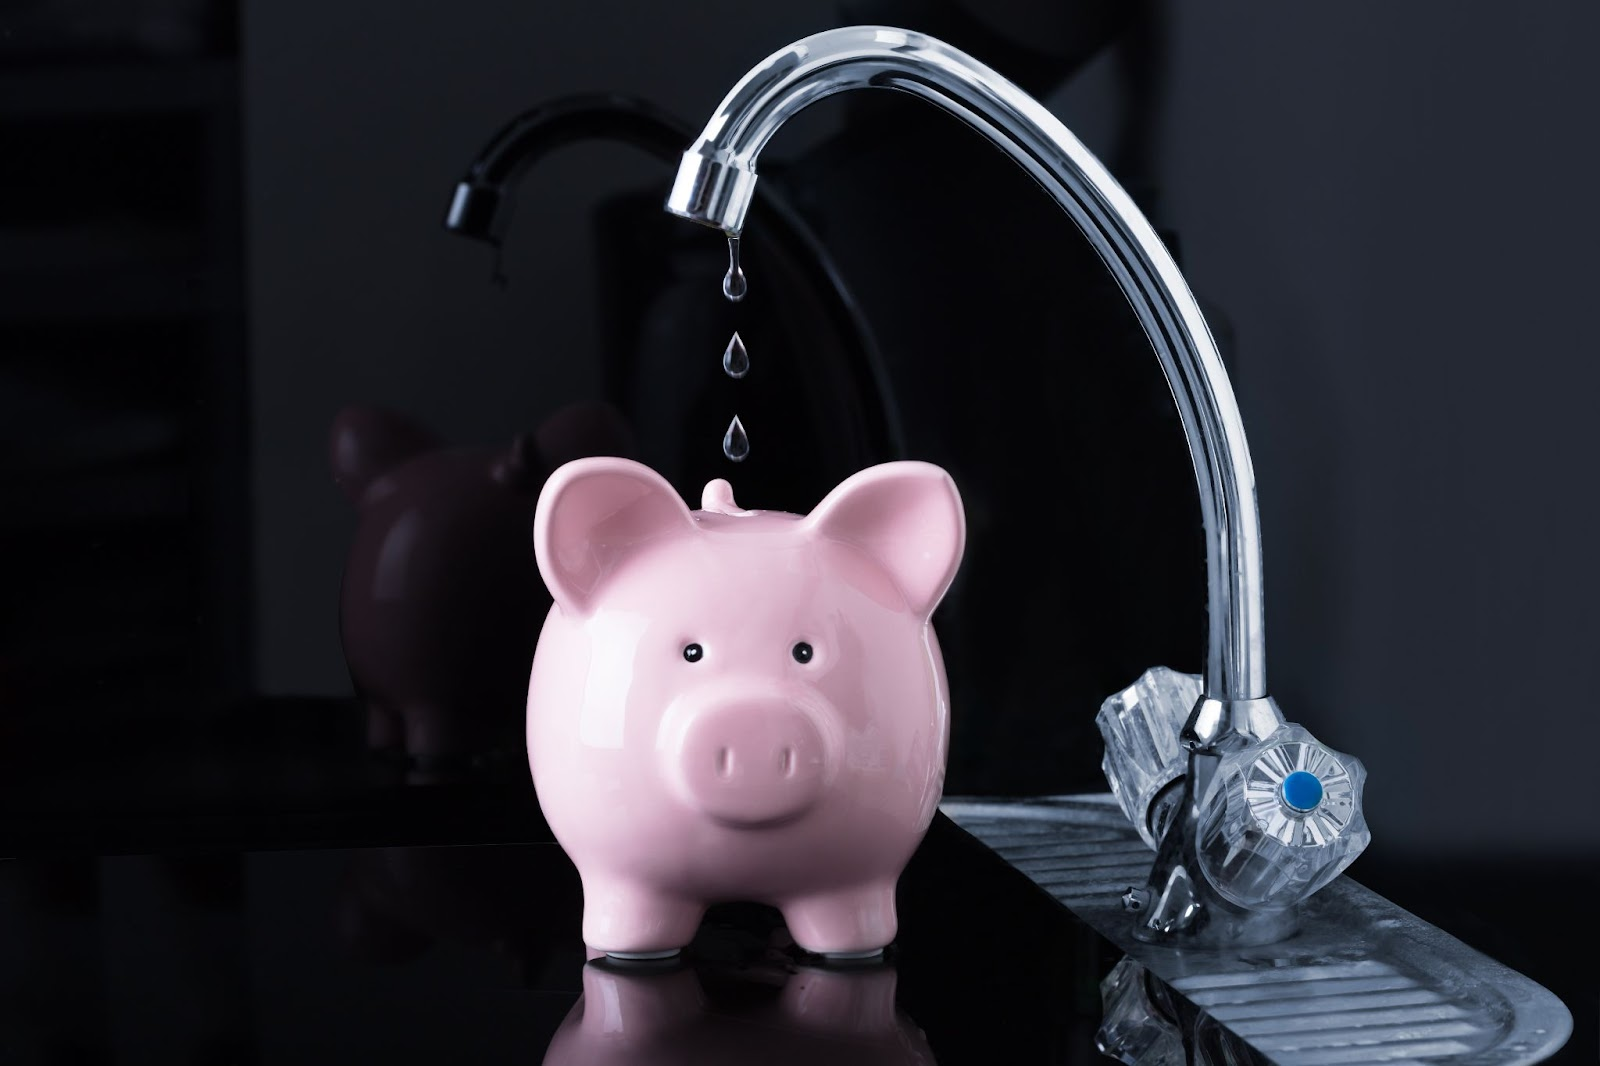 Leaky faucet dripping water into cute pink piggy bank